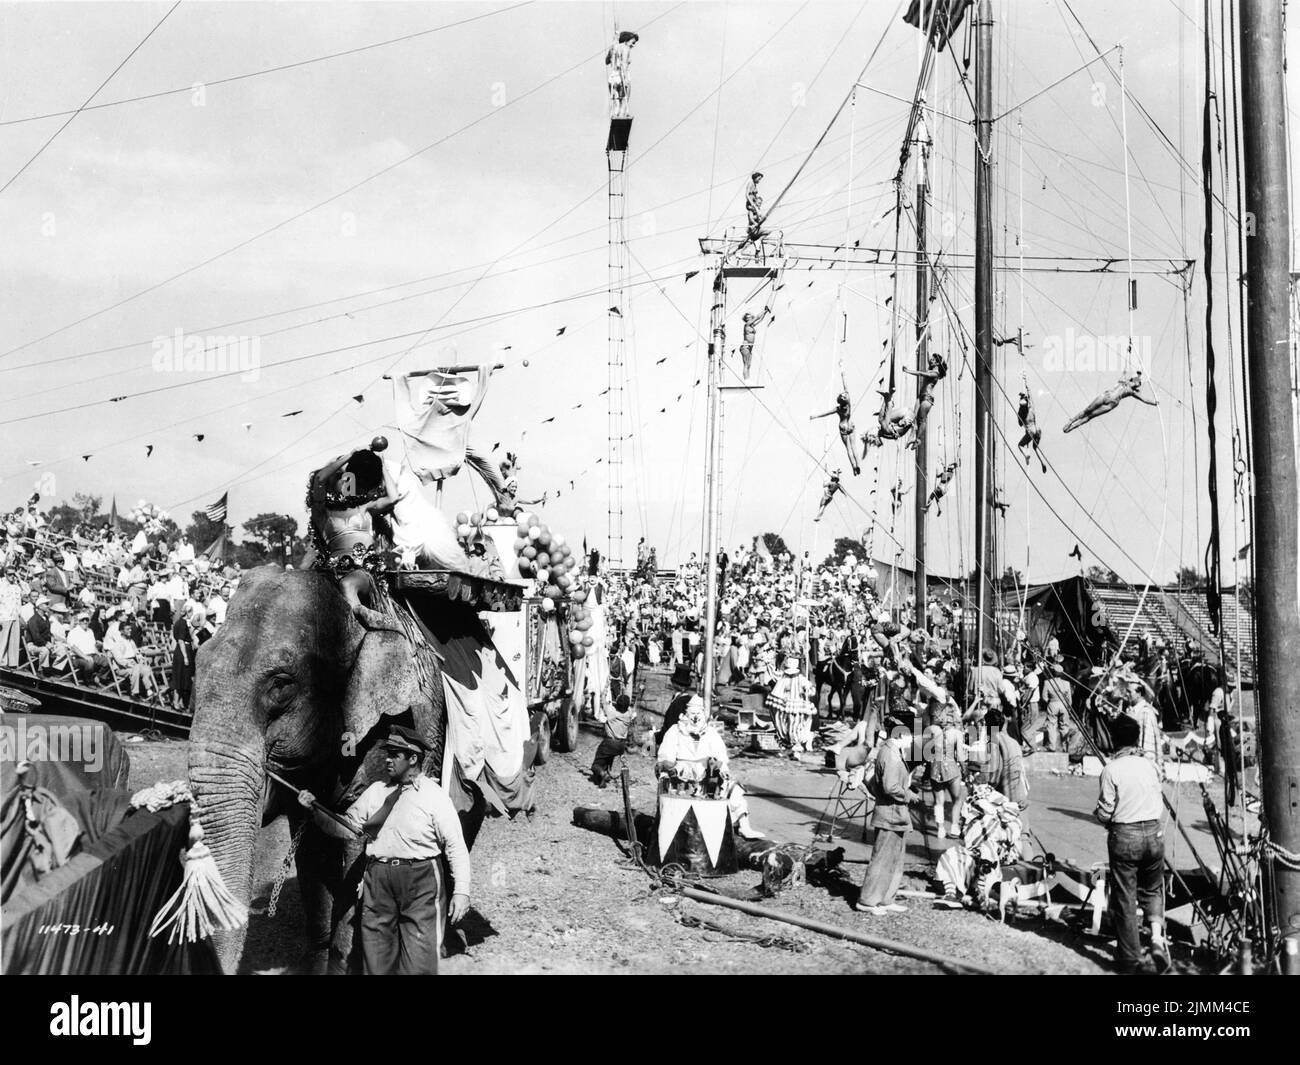 GLORIA GRAHAME and CORNEL WILDE (kissing on elephant) and DOROTHY LAMOUR (top of carriage with balloons) in huge Circus Scene / Parade with Audience and Acrobats in THE GREATEST SHOW ON EARTH 1952 director CECIL B. DeMILLE Paramount Pictures Stock Photo